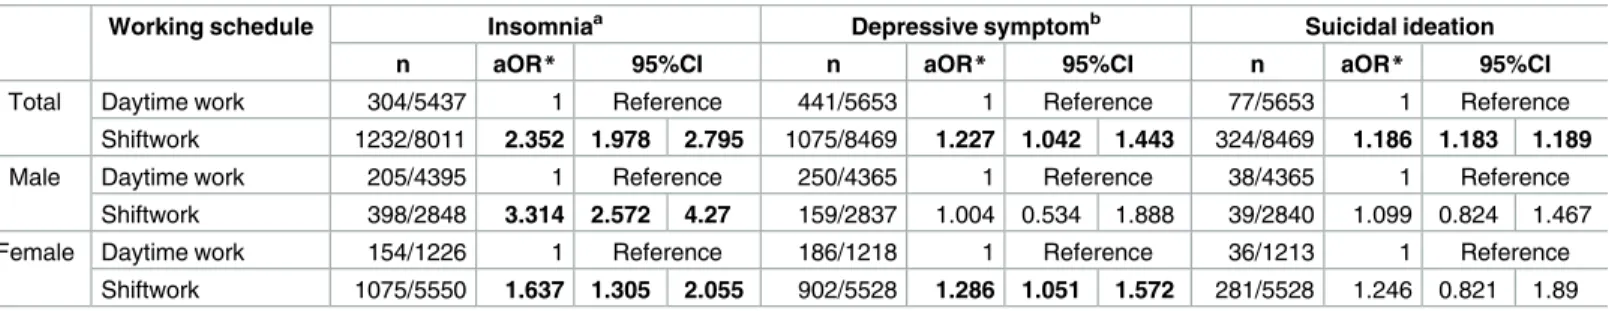 Table 2. Adjusted ORs and 95% CI values for caseness of insomnia, depressive symptom, and suicidal ideation according to working schedule.